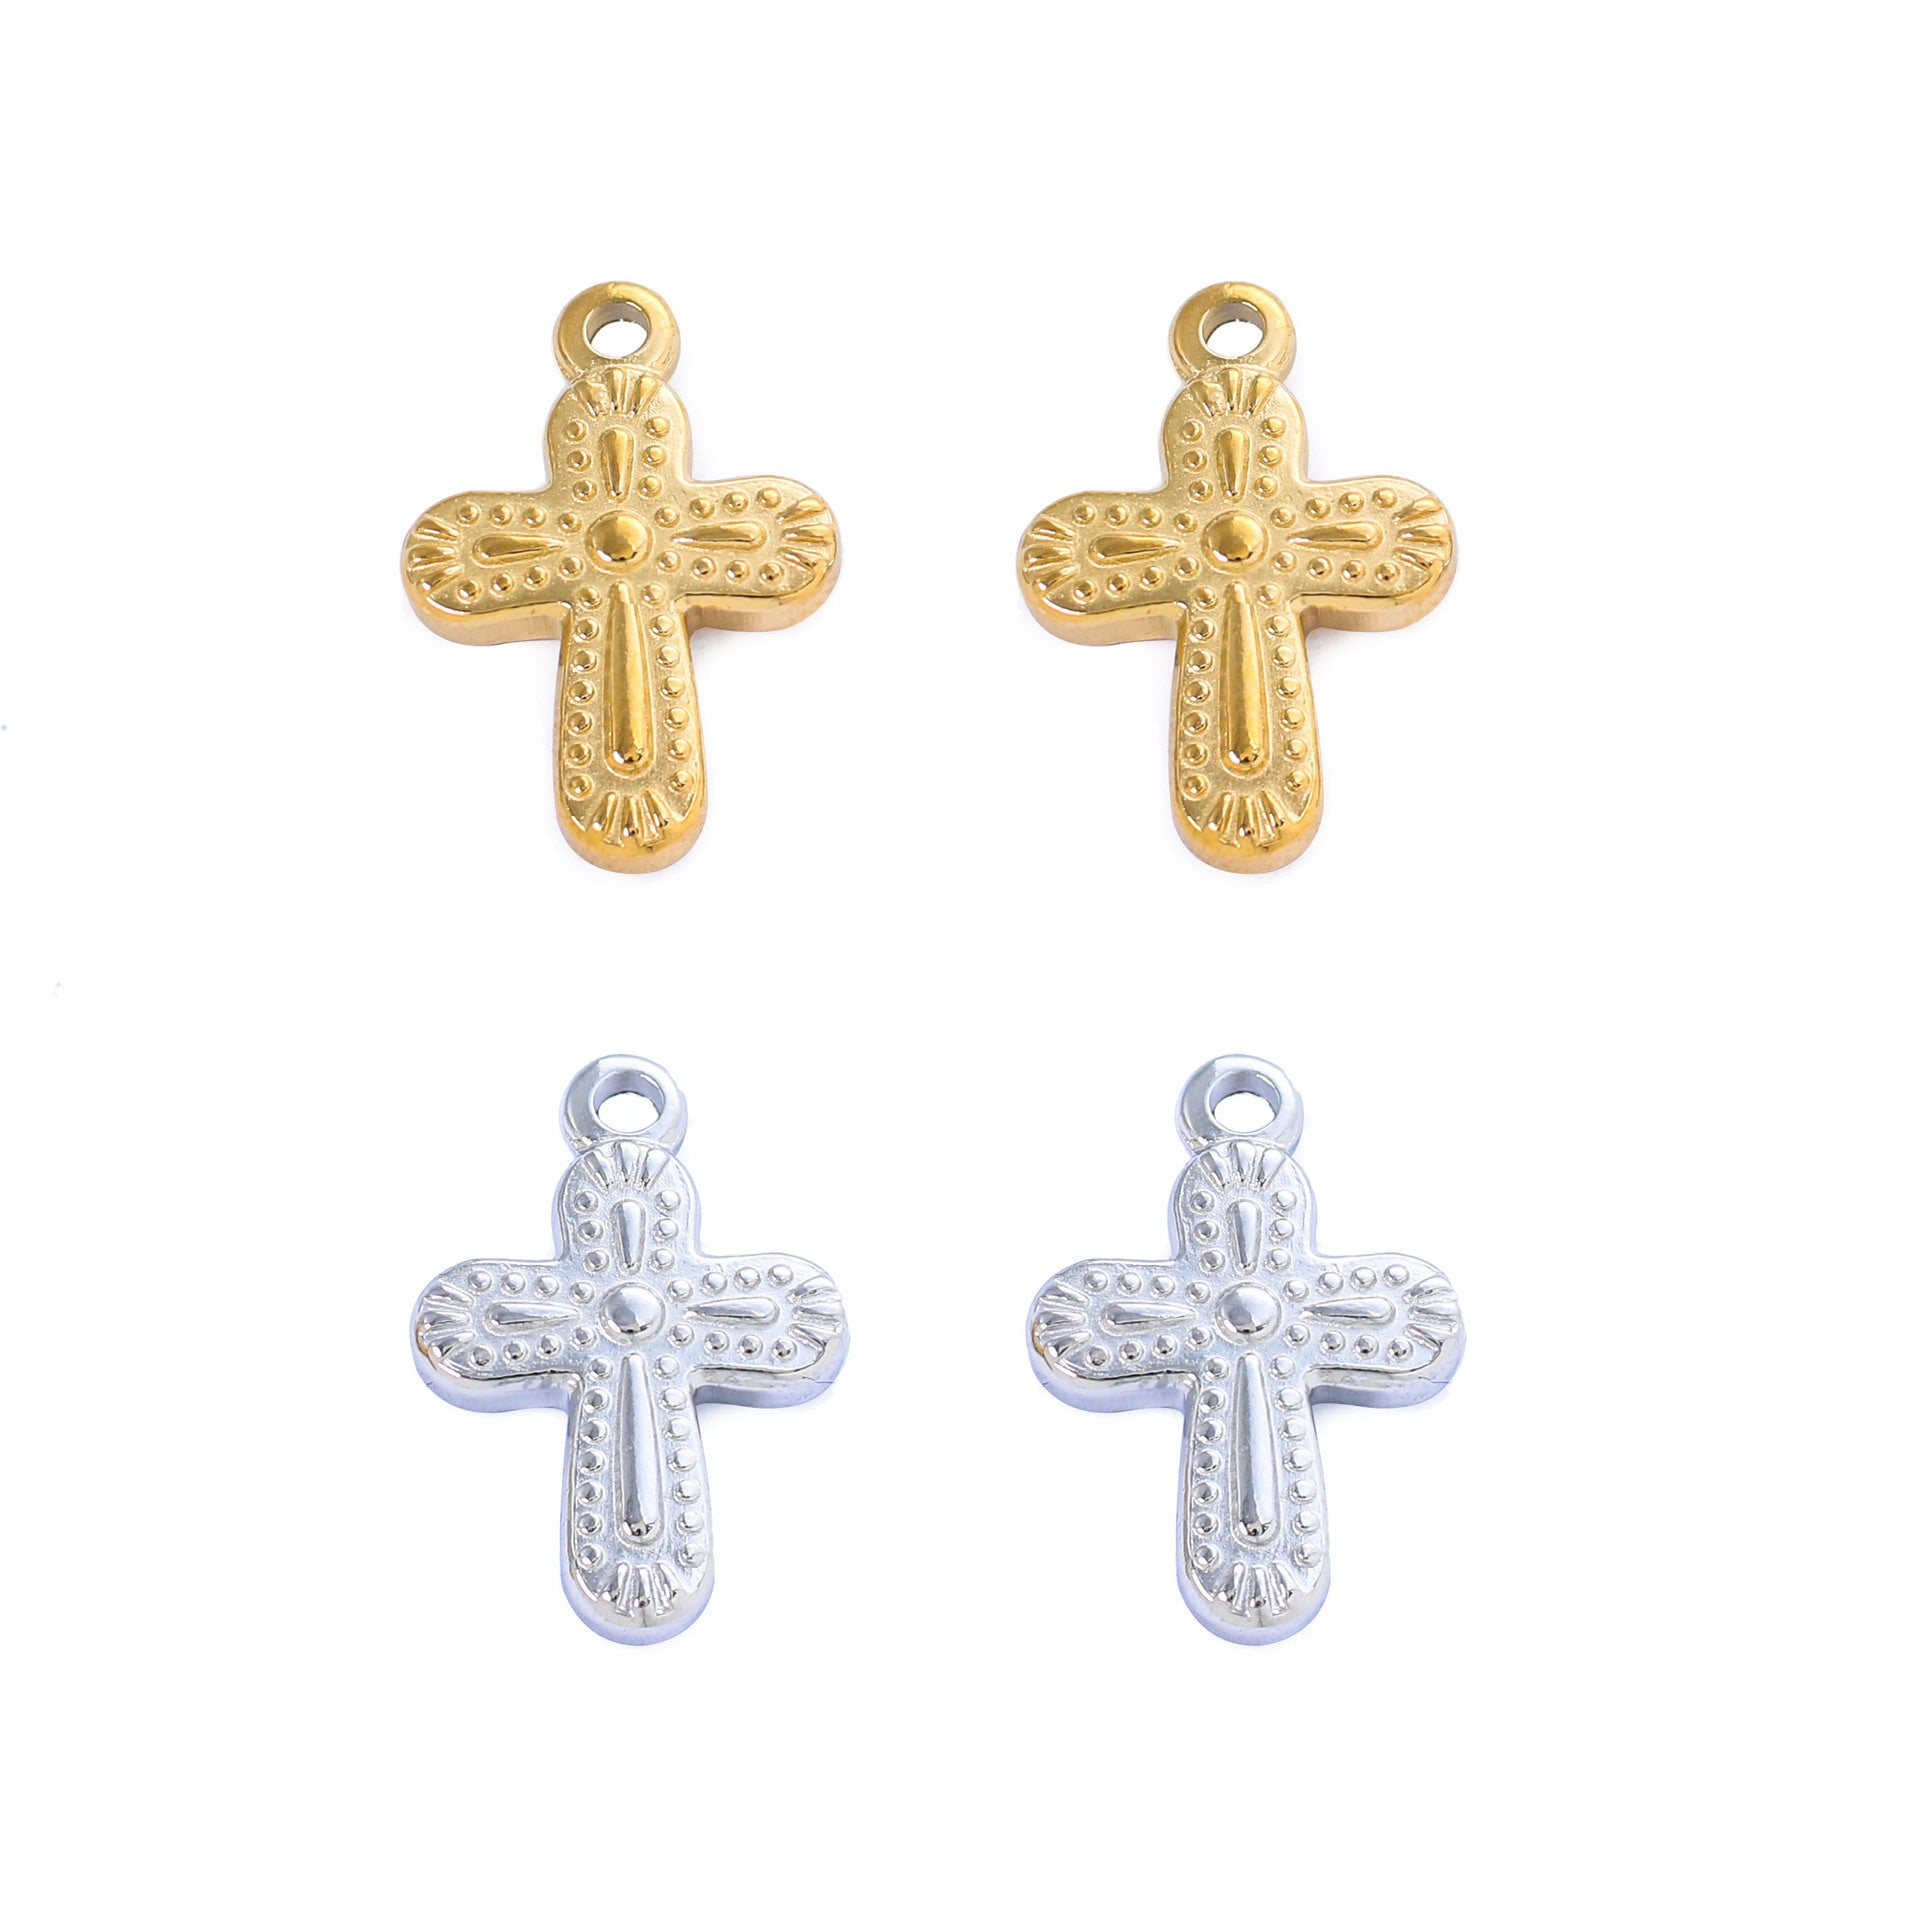 SSC9 13mm x 19mm Cross Charm Sold by the Piece Available in Stainless Steel and Waterproof Gold